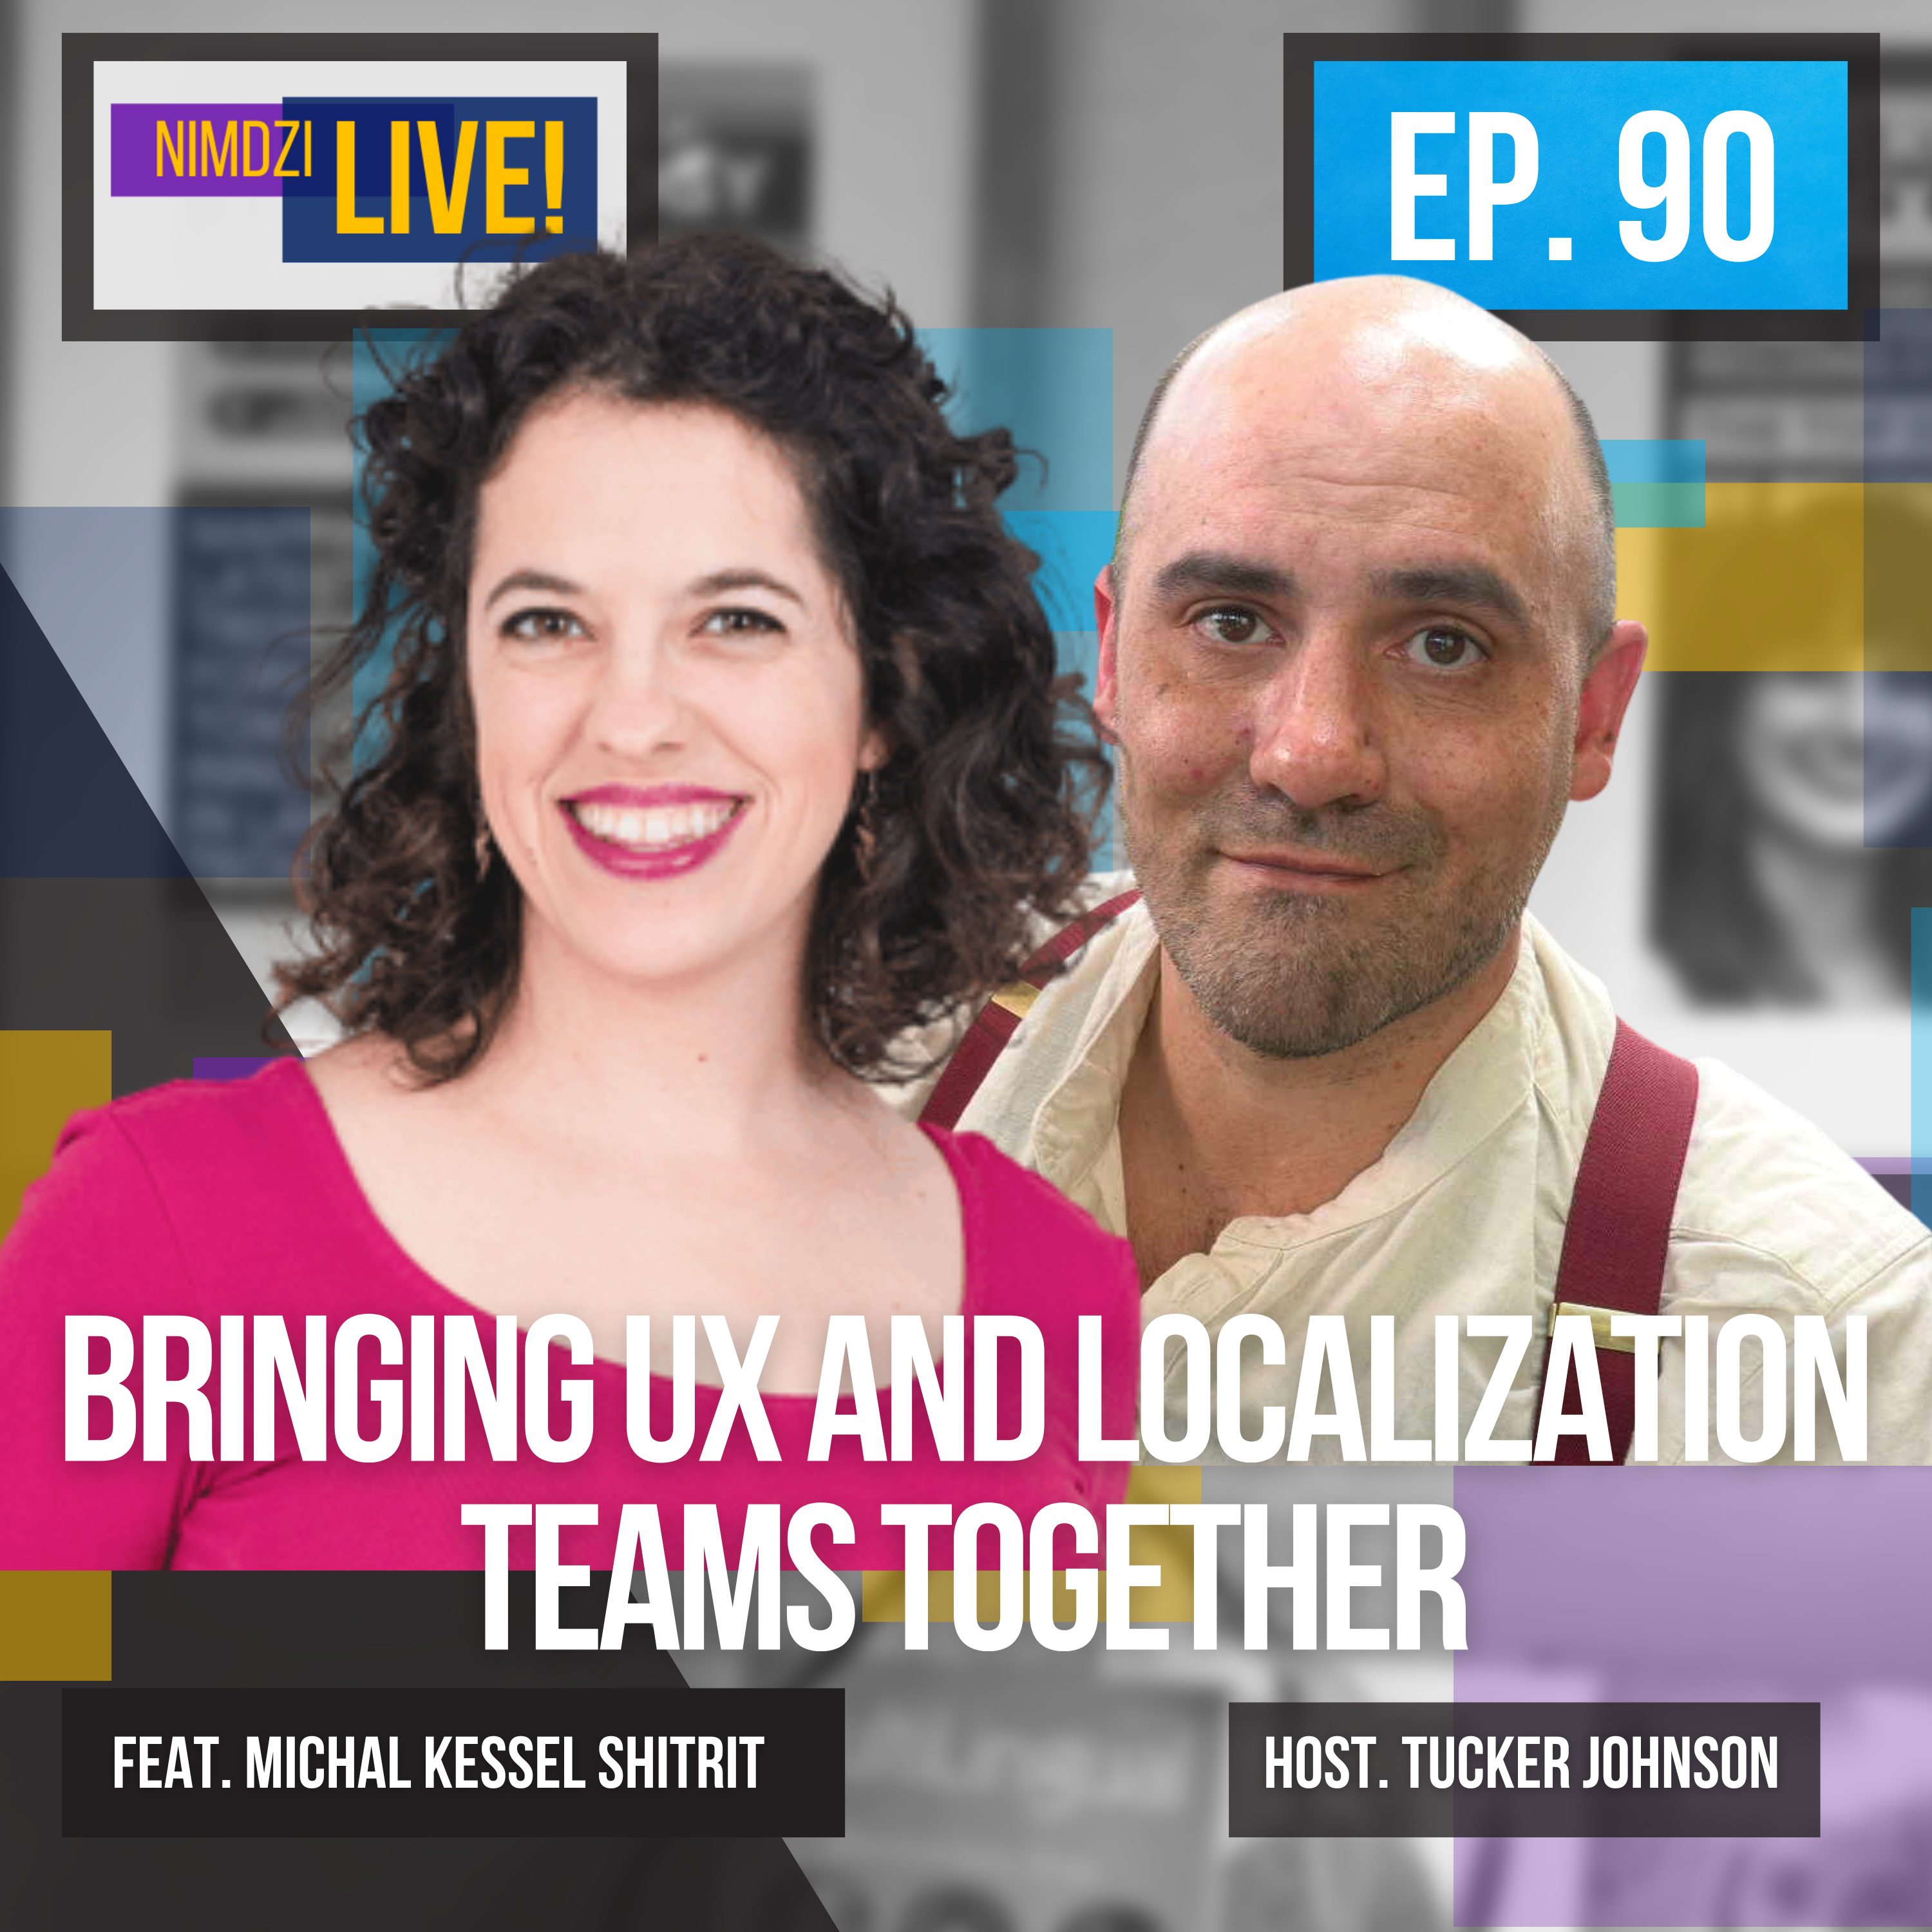 Bringing UX and Localization Teams Together feat. Michal Kessel Shitrit